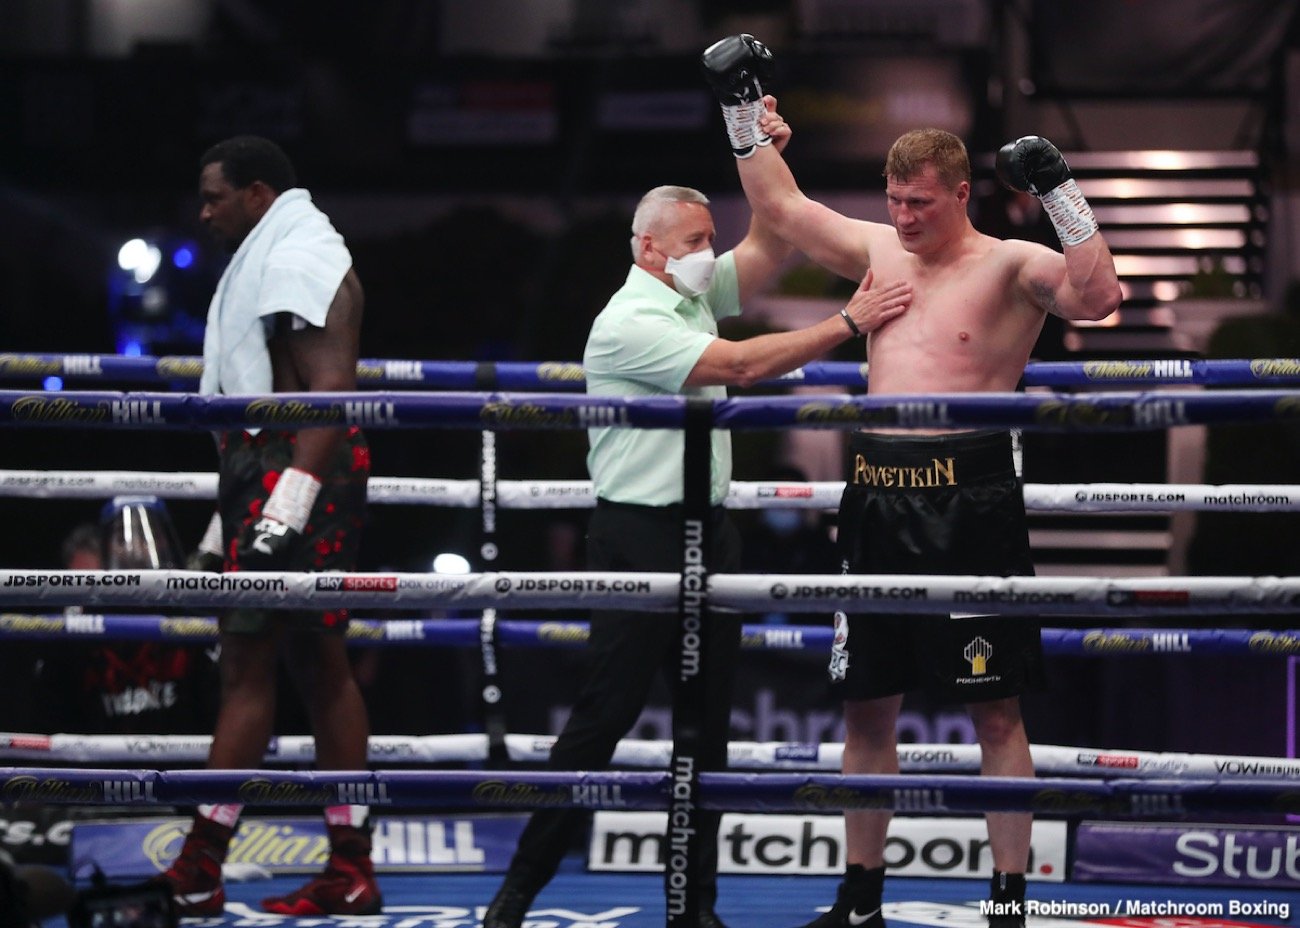 Image: Dillian Whyte: I only need to make minor adjustments for Povetkin rematch